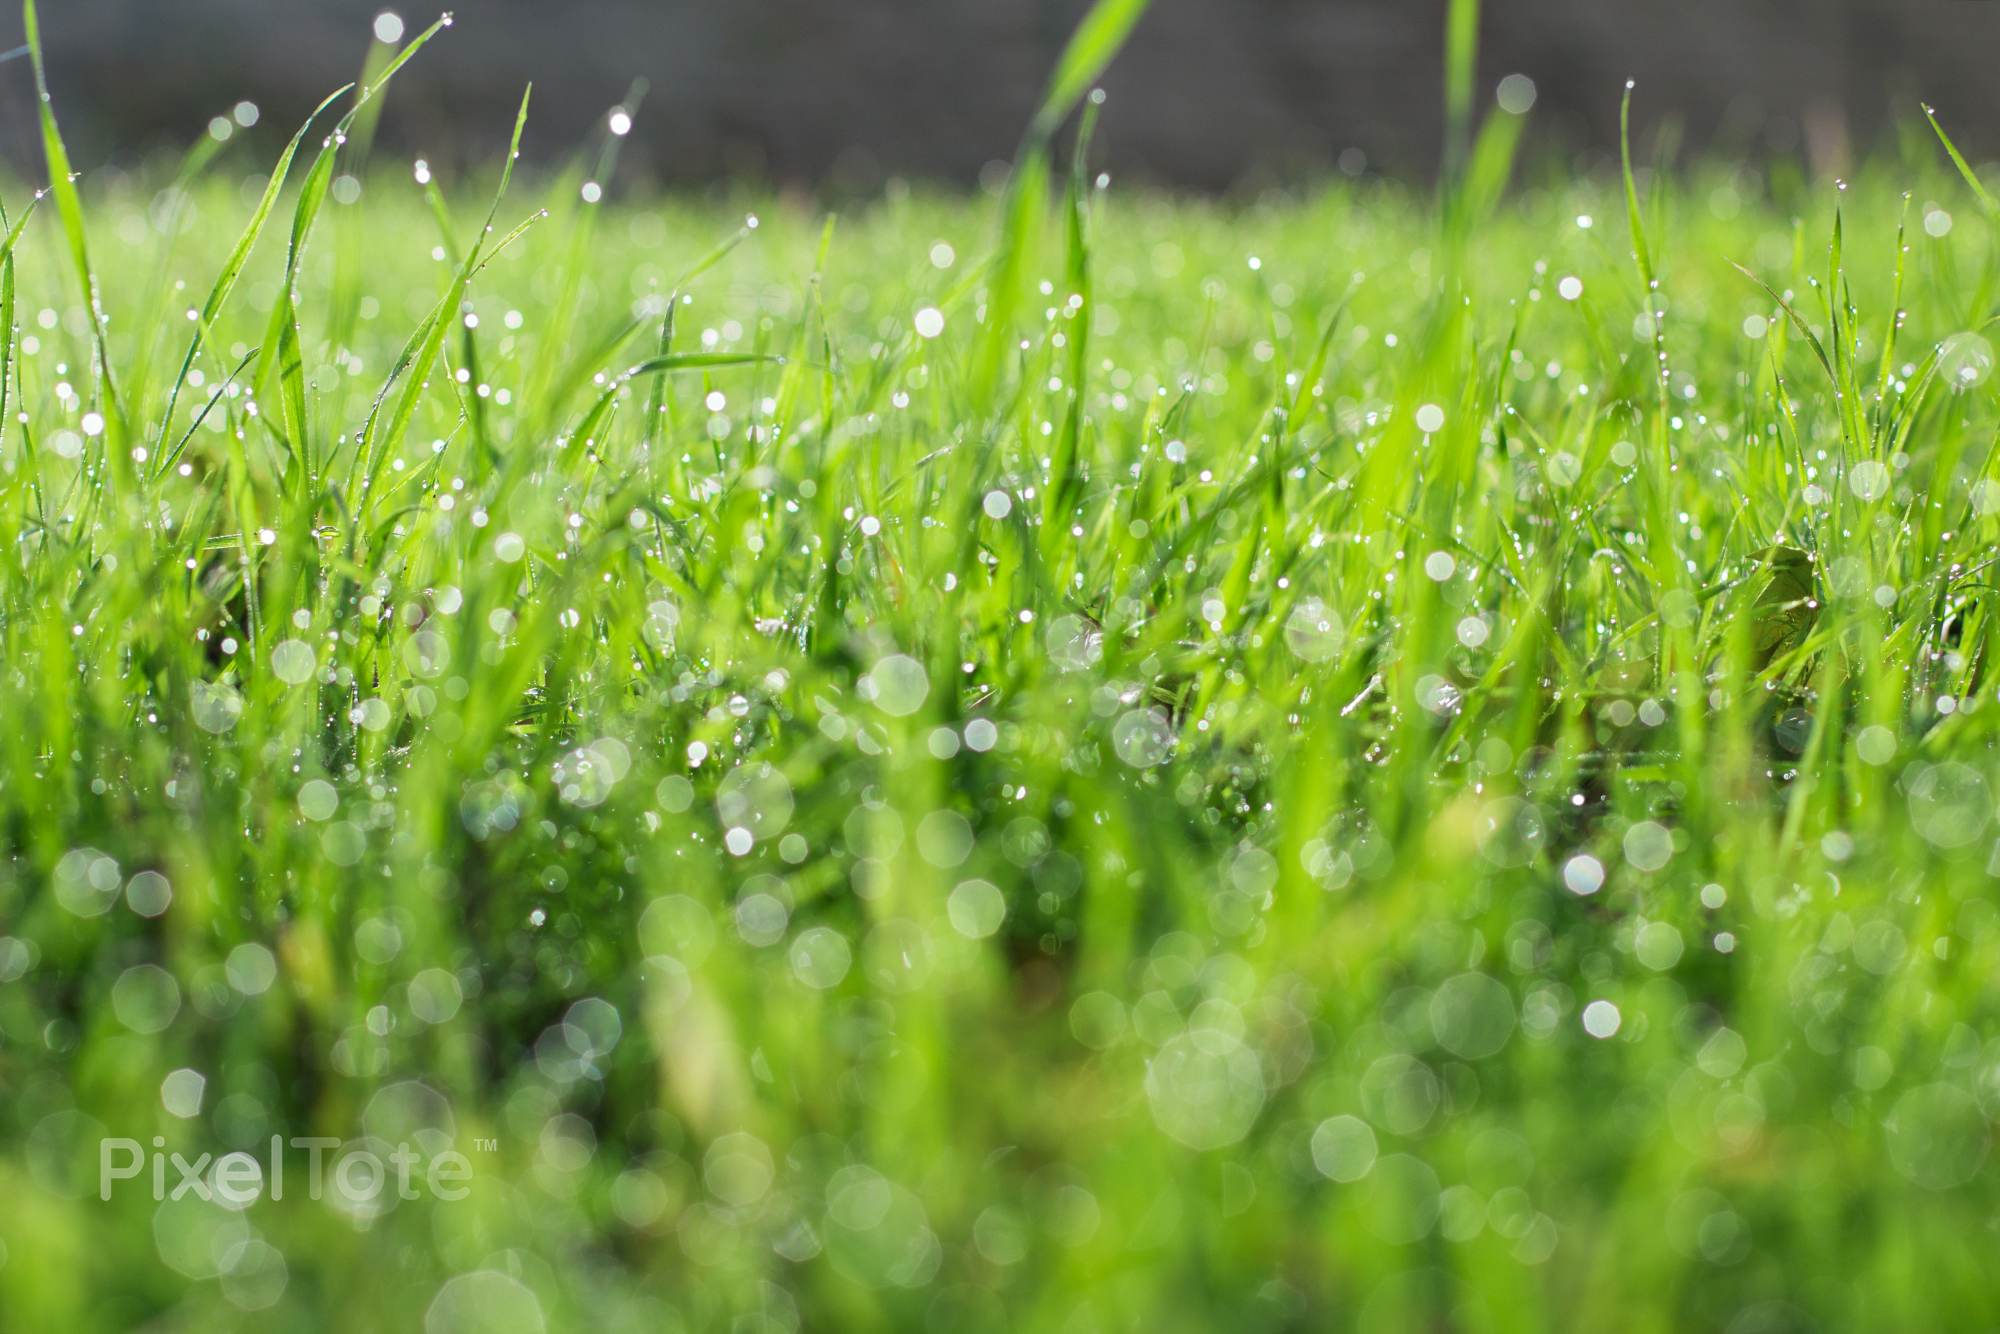 Ground-Level View of a Green Grass with Morning Dew on Its Blades ...